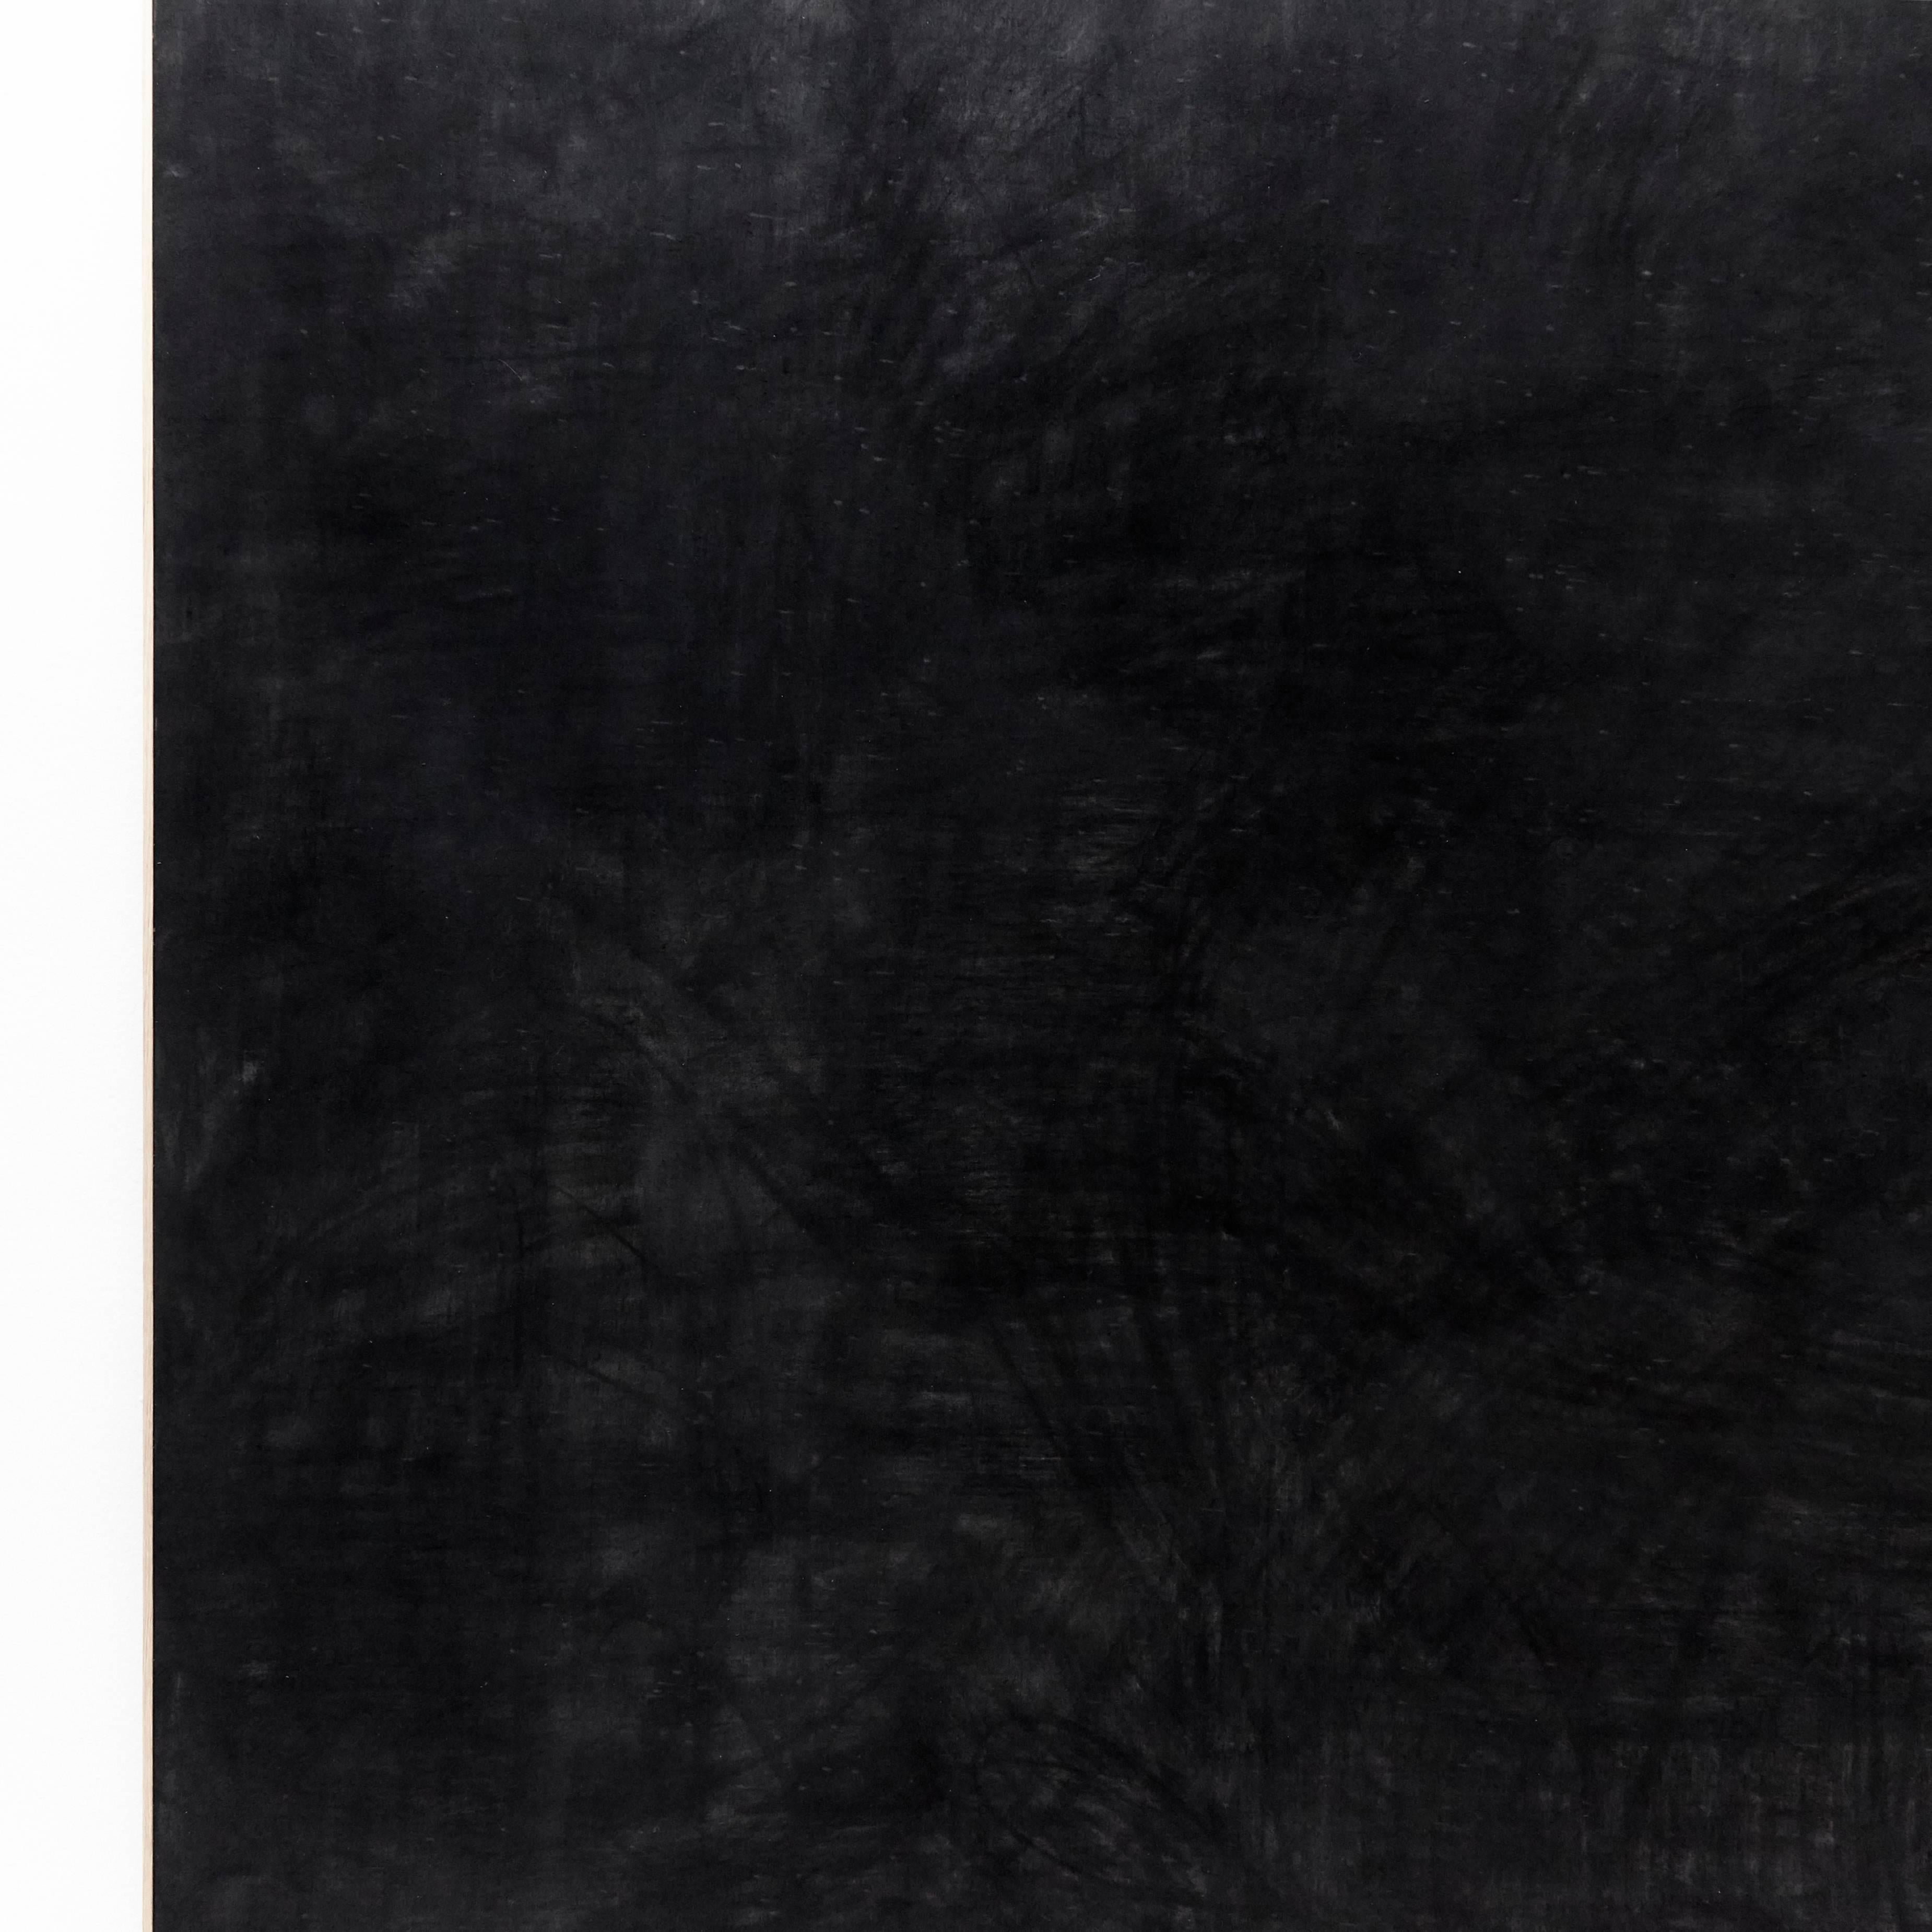 Spanish Enrico Della Torre Large Painting in Black Charcoal